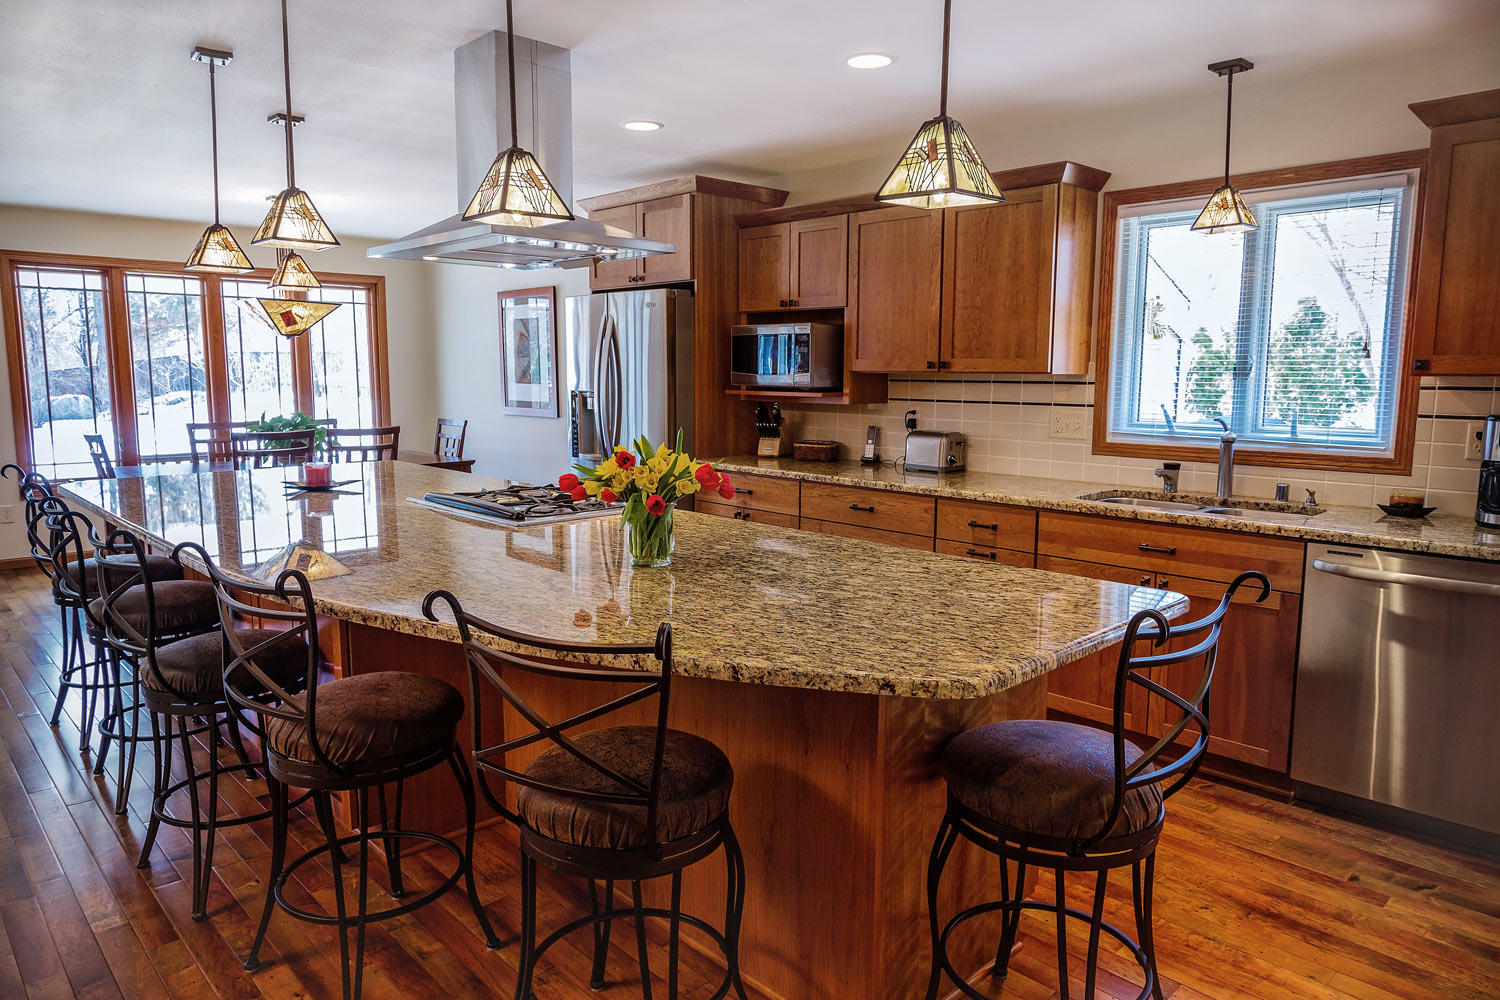 Tour a Spacious Gold and White Chef's Kitchen With Grand Island